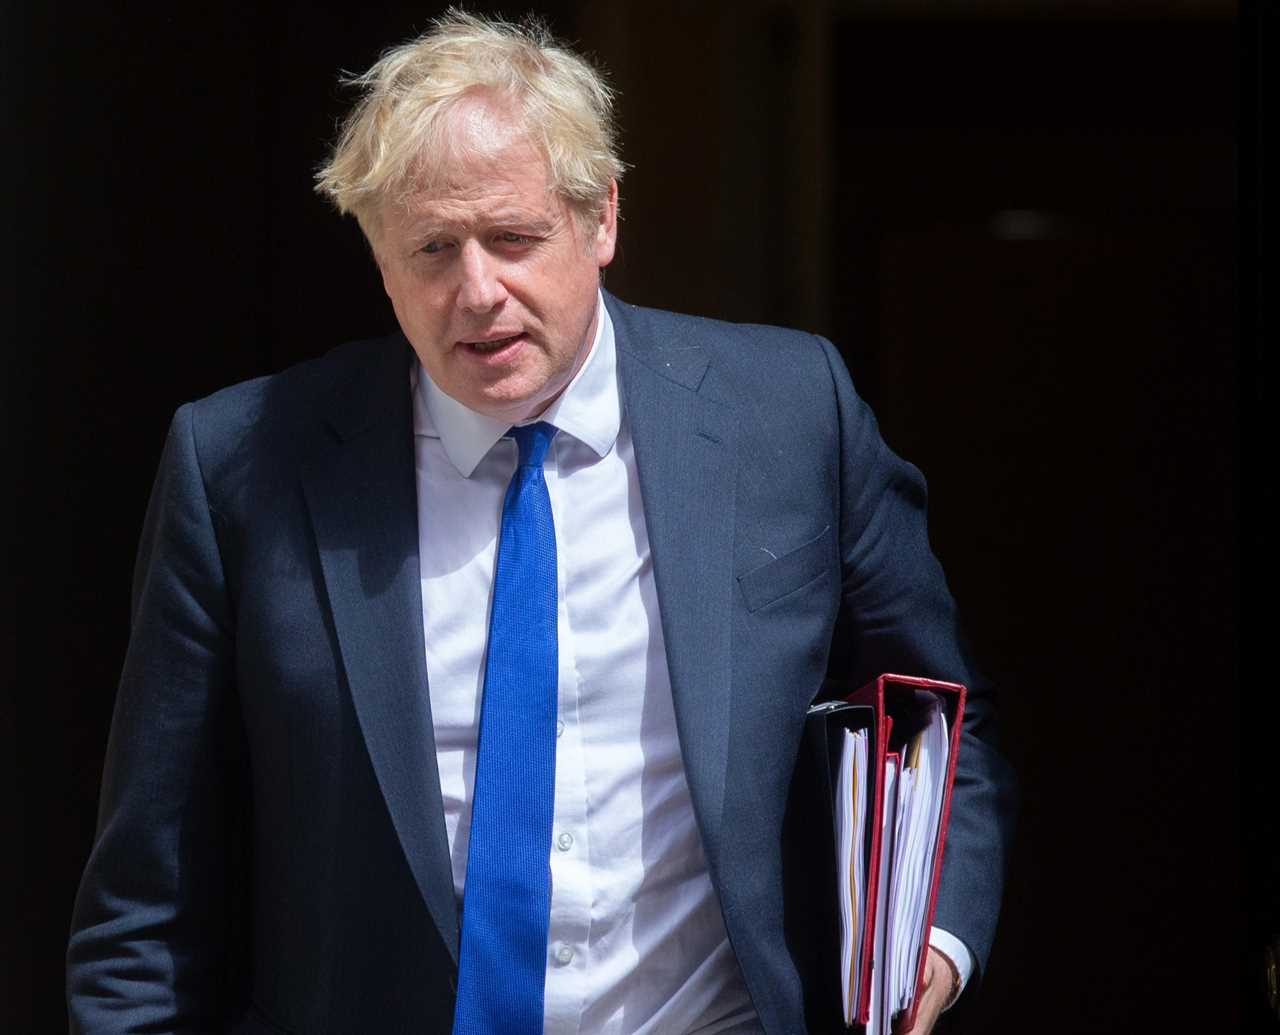 Boris Johnson ‘abused his position by trying to secure job for young female friend’